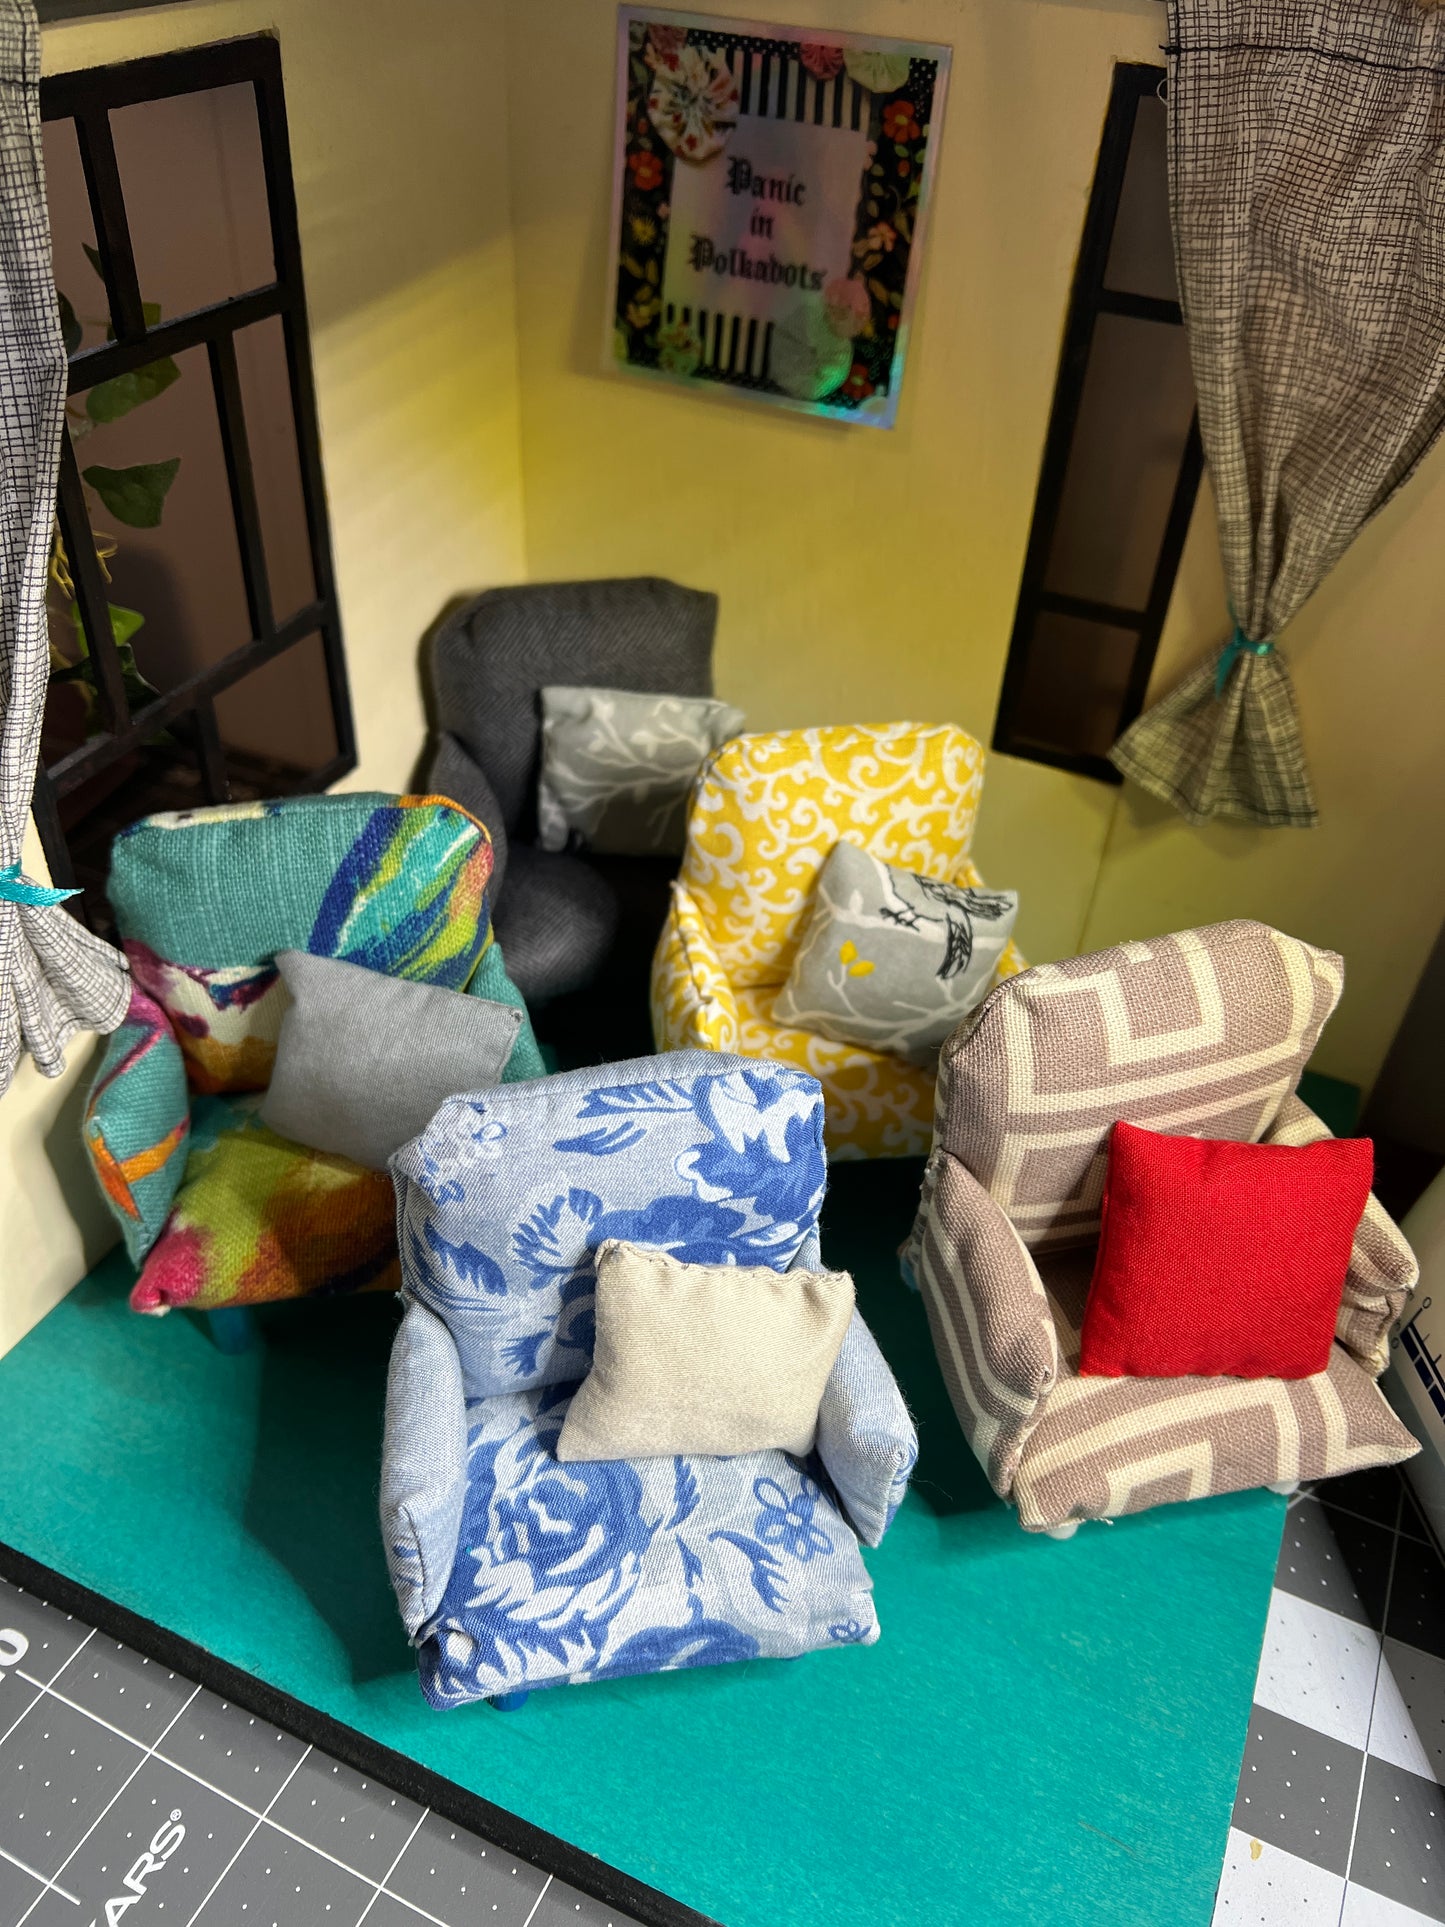 a collection of dollhouse chairs with pillows in a mini room setting, Panic in Polkadots sticker on wall.